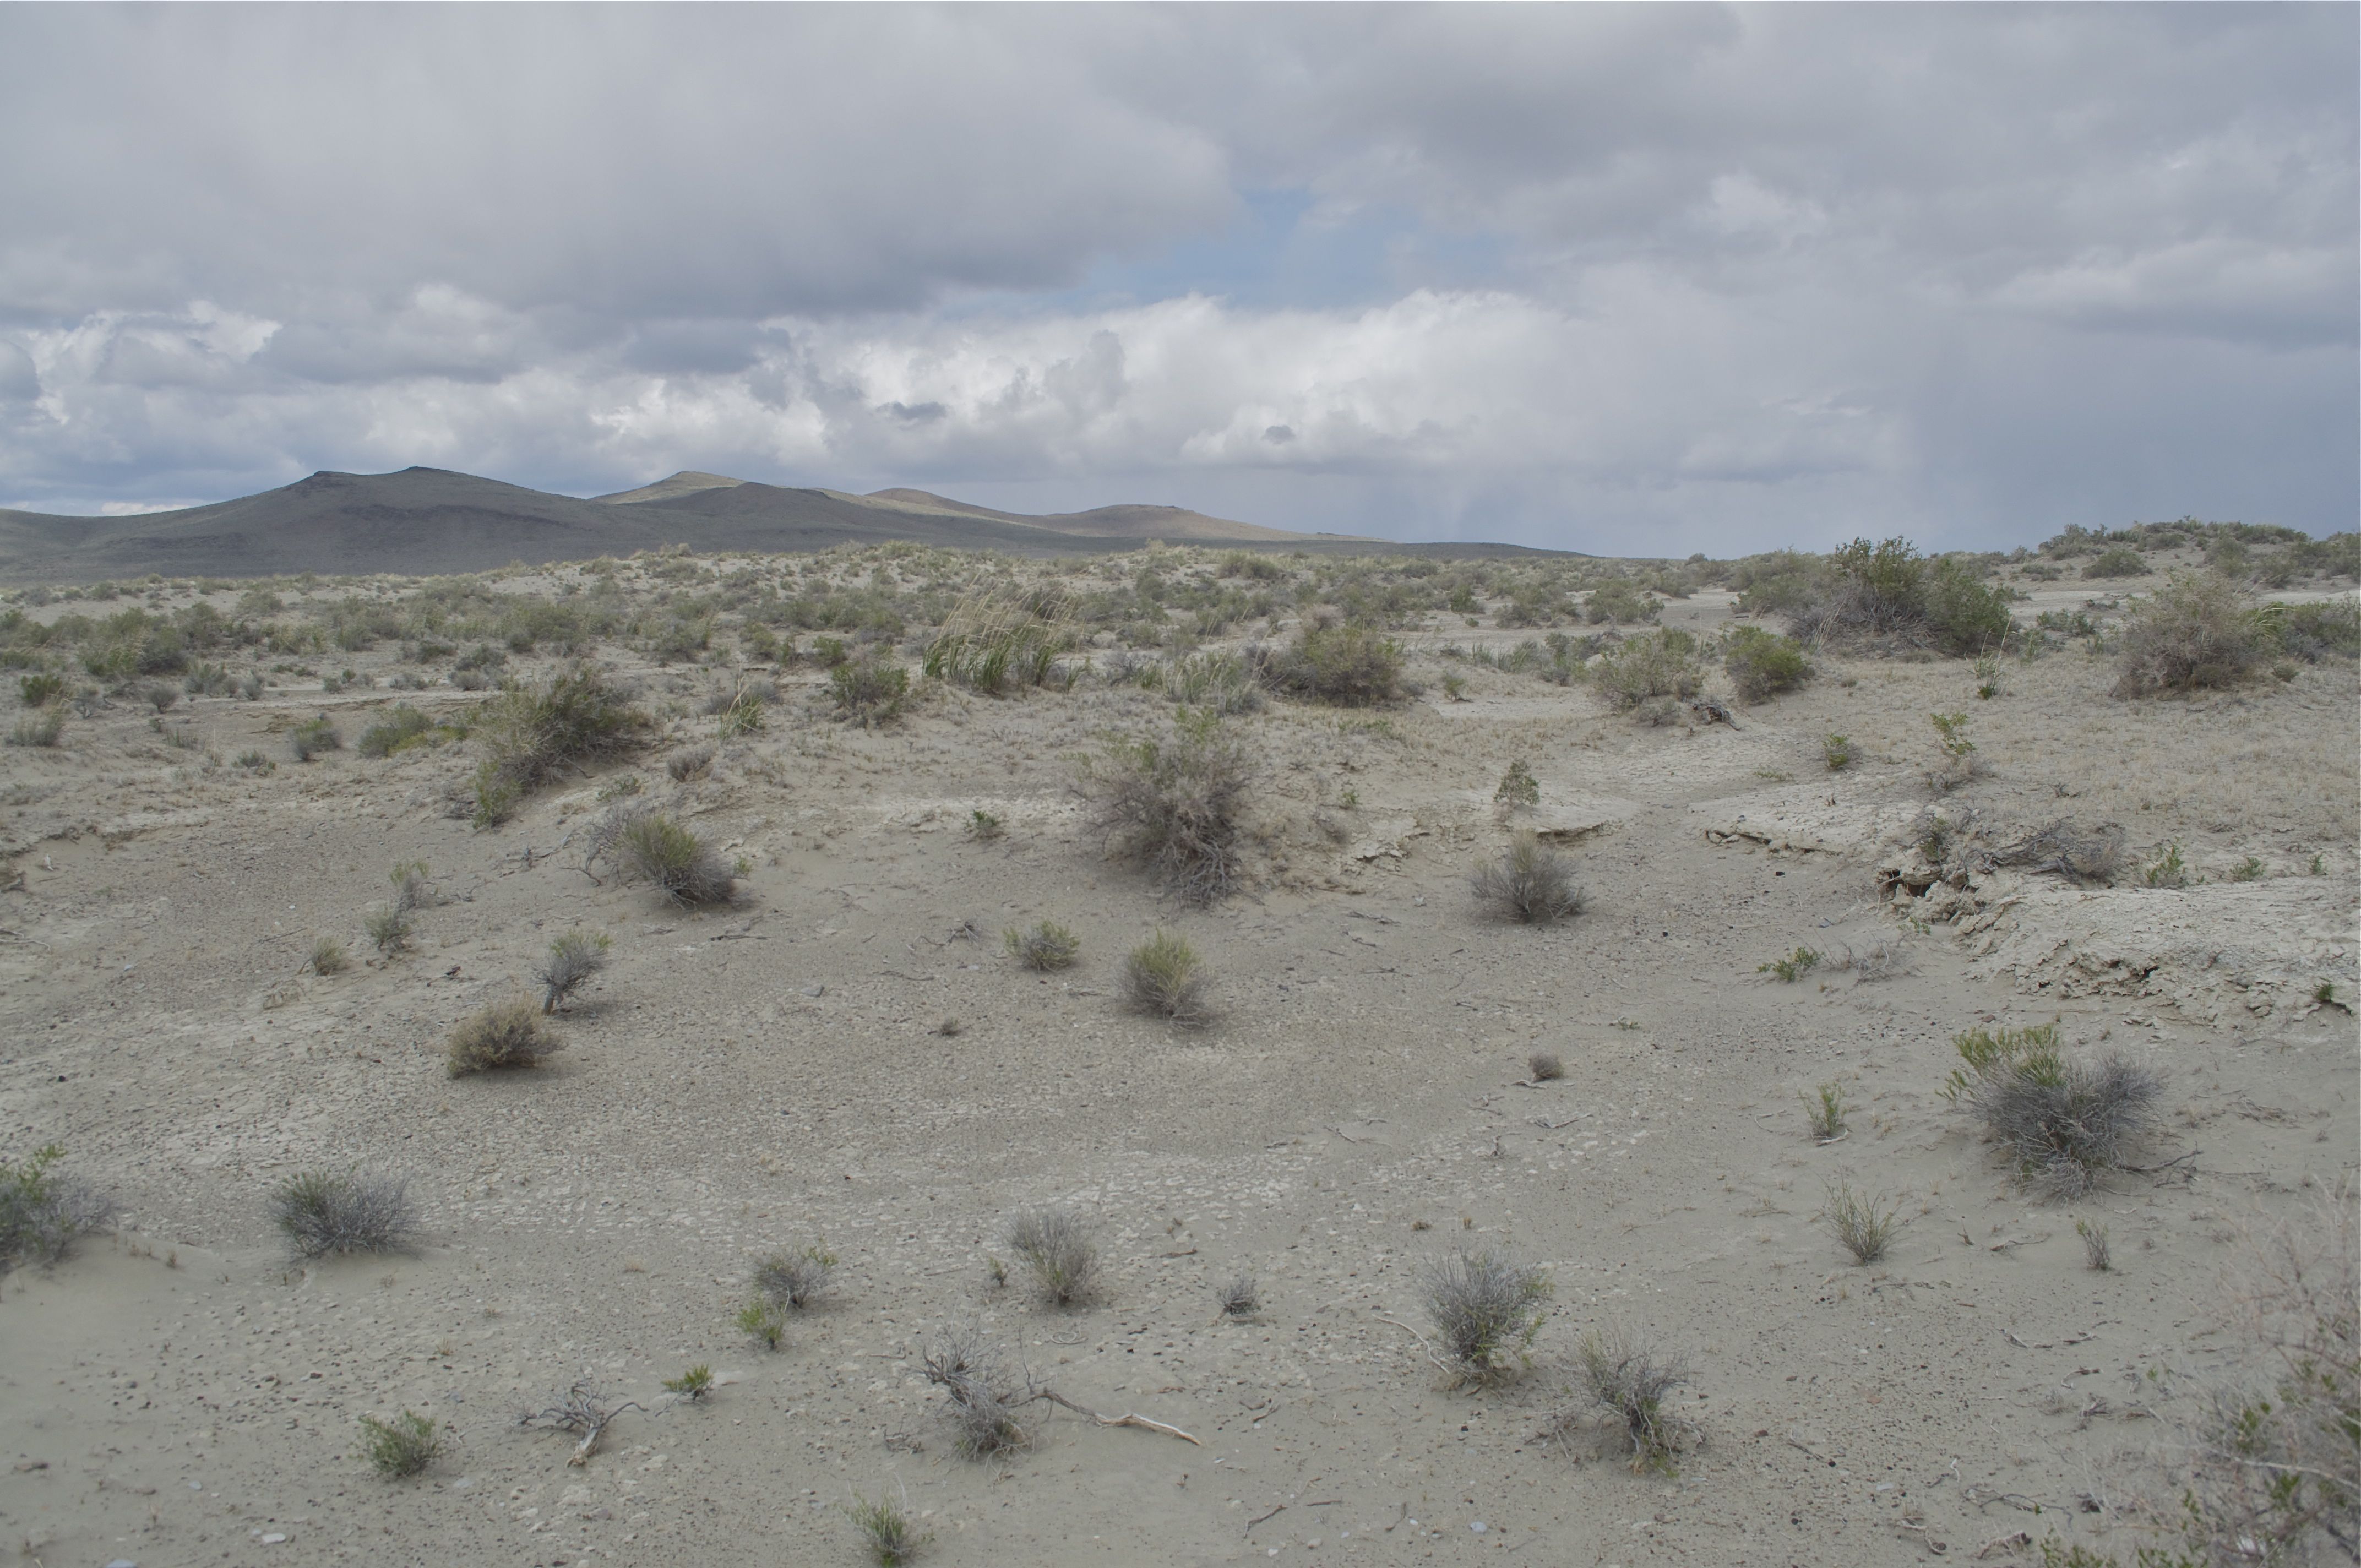 The confluence point lies amid sagebrush, on a dry lake bed. A rock cairn left by previous visitors marks the spot.